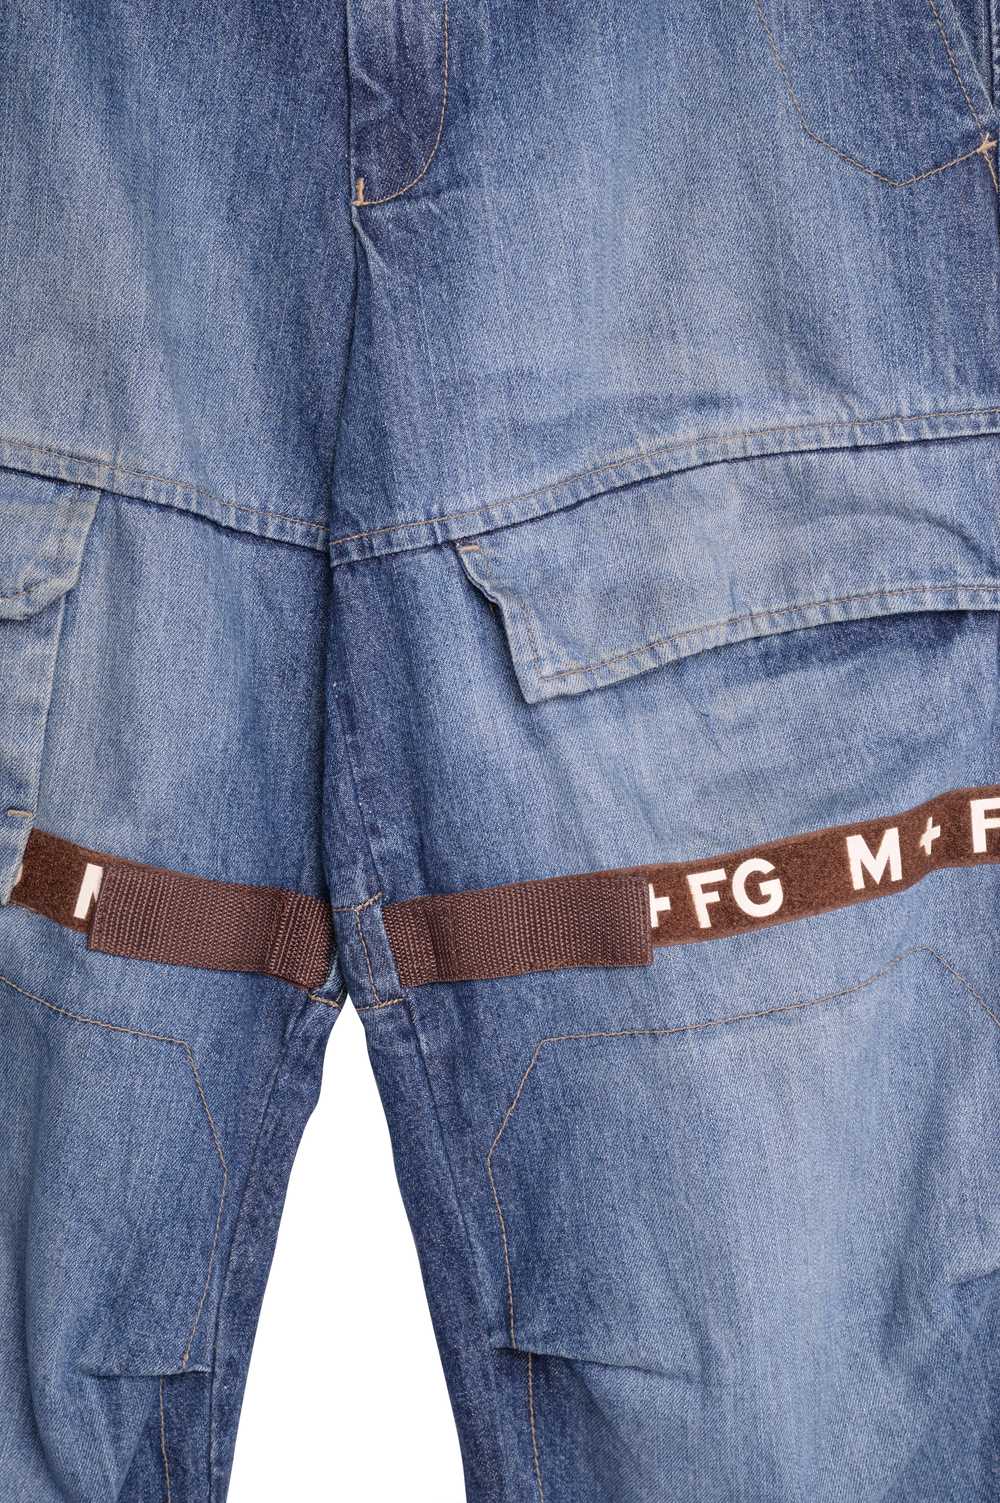 1990s Faded Girbaud Cargo Jeans 46497 - image 3